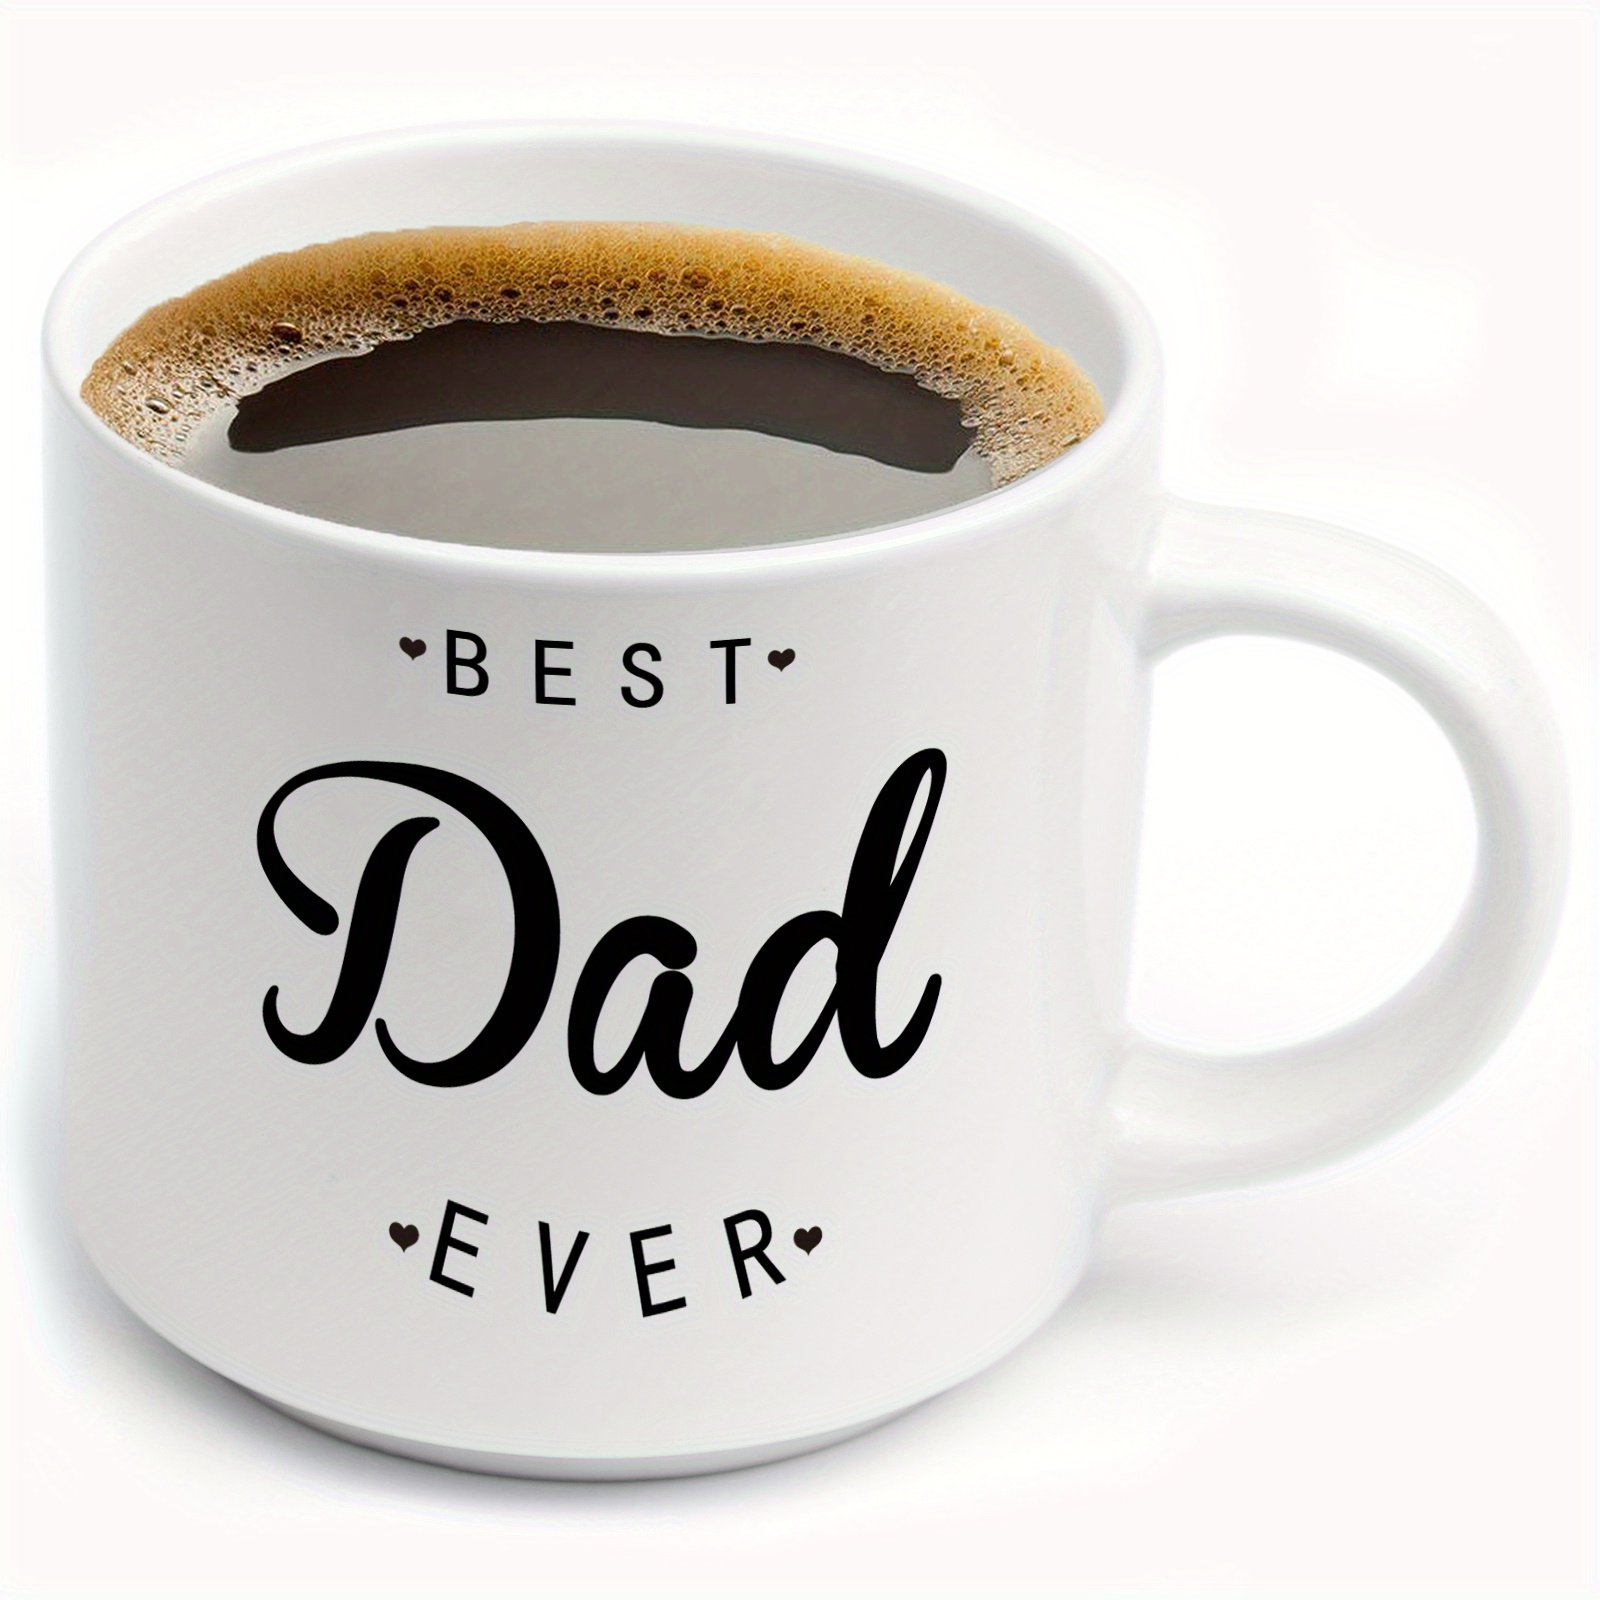 

1pc 300ml/10oz "best Dad Ever" Coffee Mug, Christmas Gifts, Funny Quote Cup Gift For Father's Day Valentine's Day From Daughter Son Wife, Also Suitable For Cafe Restaurant Eid Al-adha Mubarak